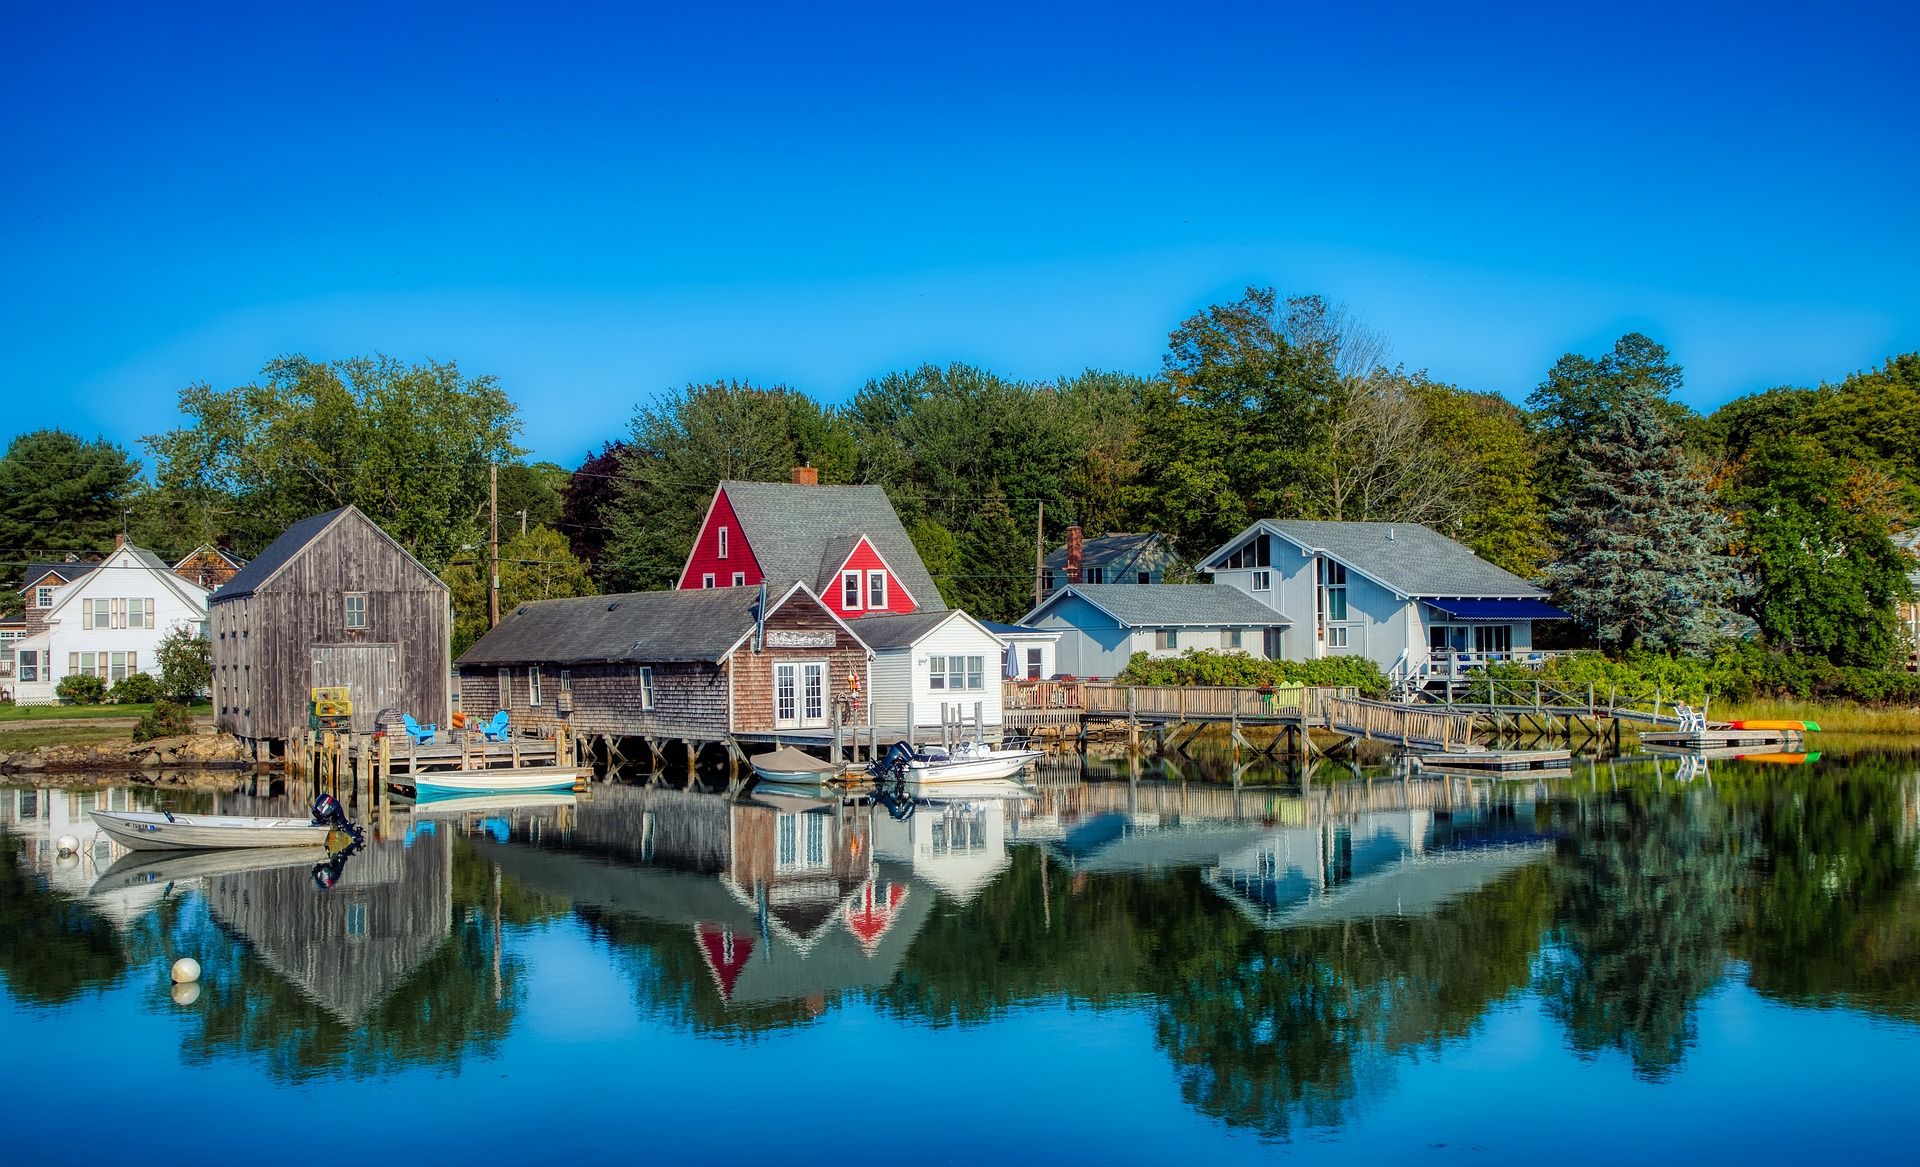 Reflection of houses on water in Cape Porpoise Harbor, Kennebunkport, Maine